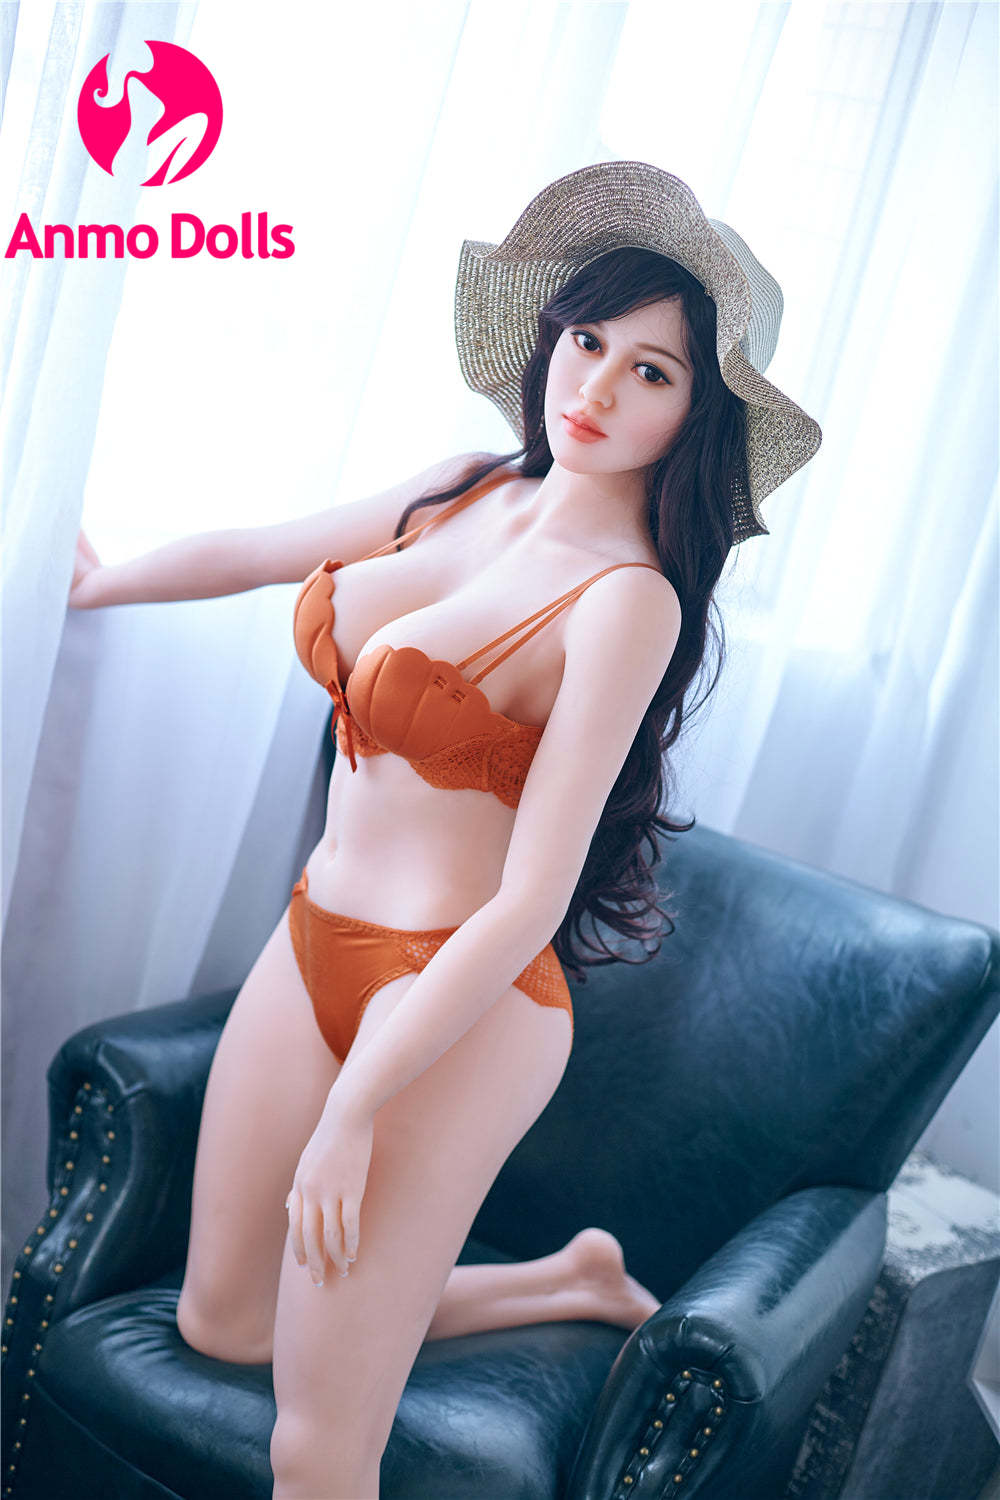 Saskia - Hot Asian Sex Doll bombshell with Perfect Body - Anmodolls by Anmodolls